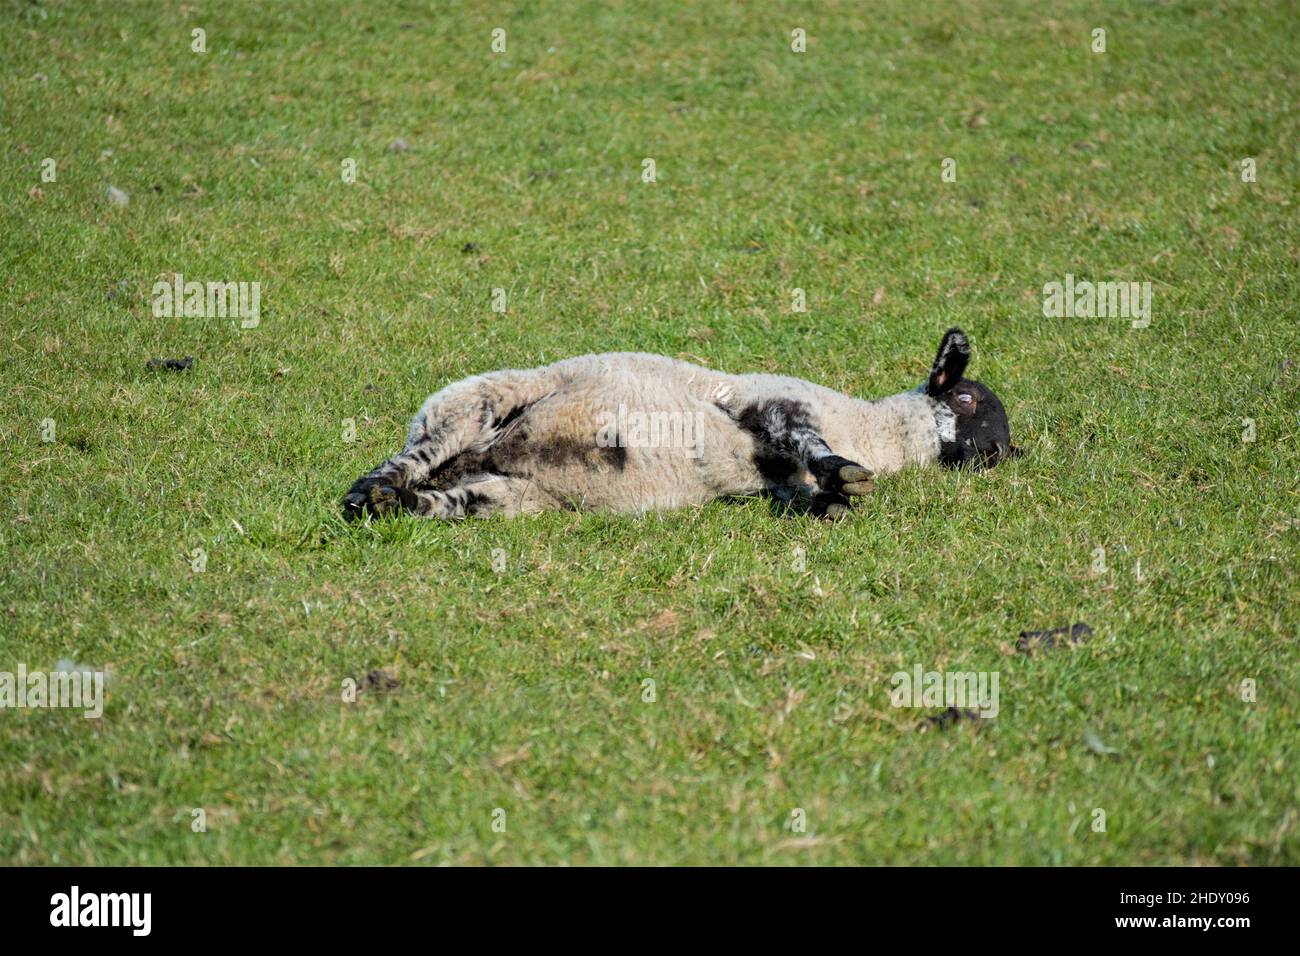 Cute lamb playing in the soft green grass. Stock Photo